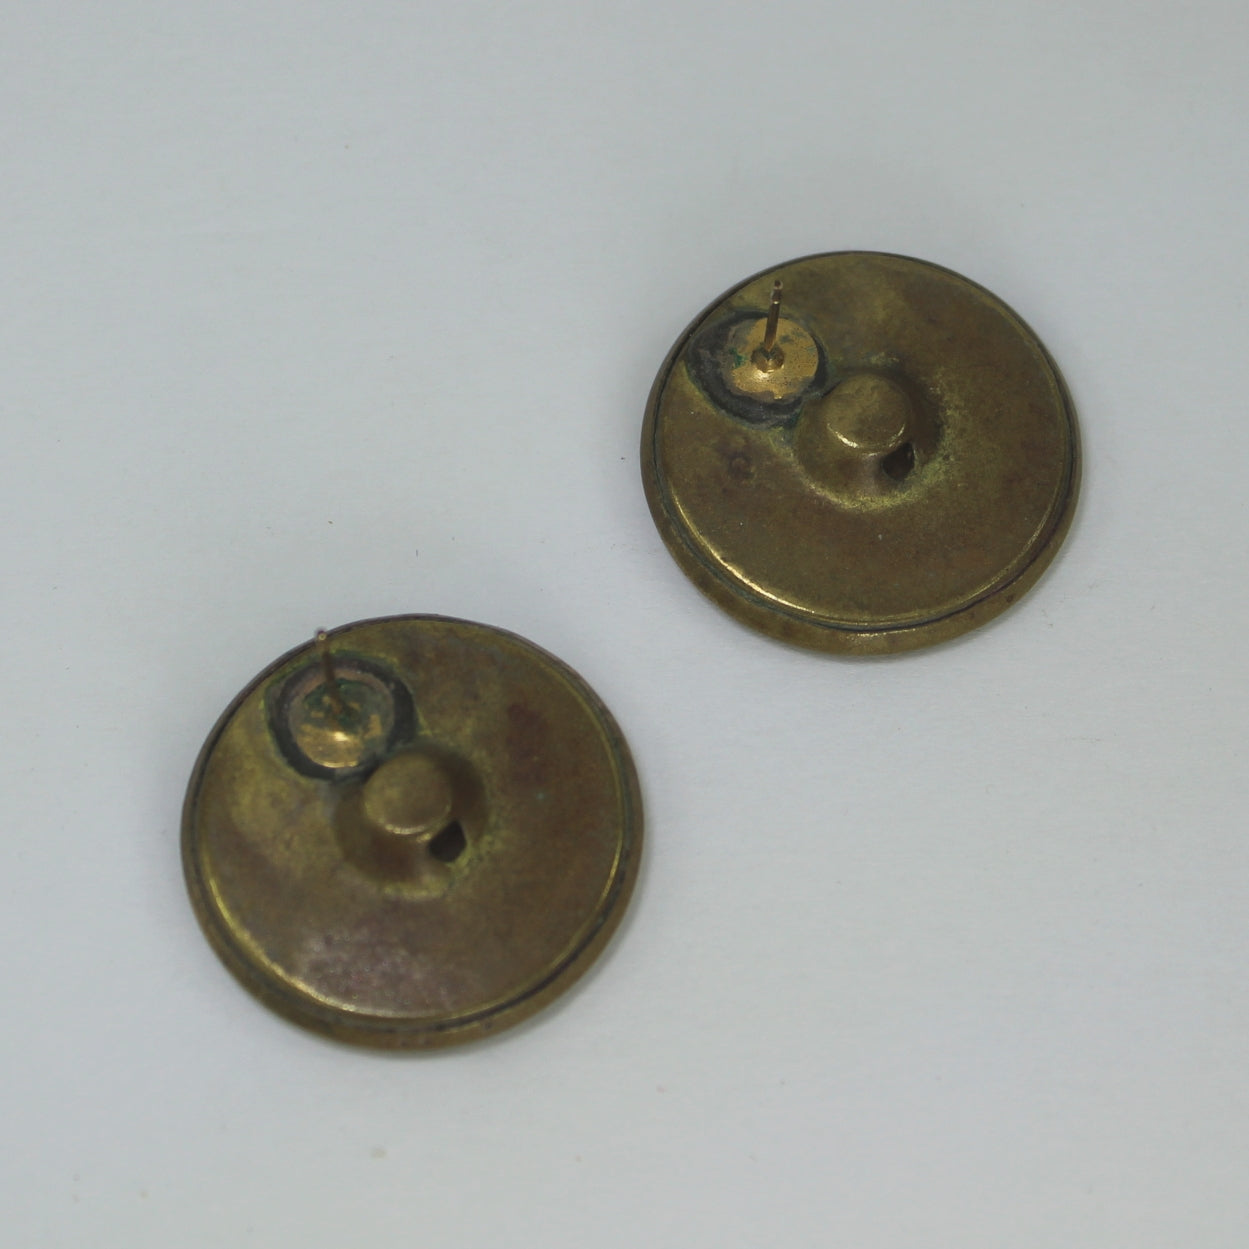 Antique Victorian Metal Buttons Earrings Post Stud Mixed Dimensional Metal brass shank backs